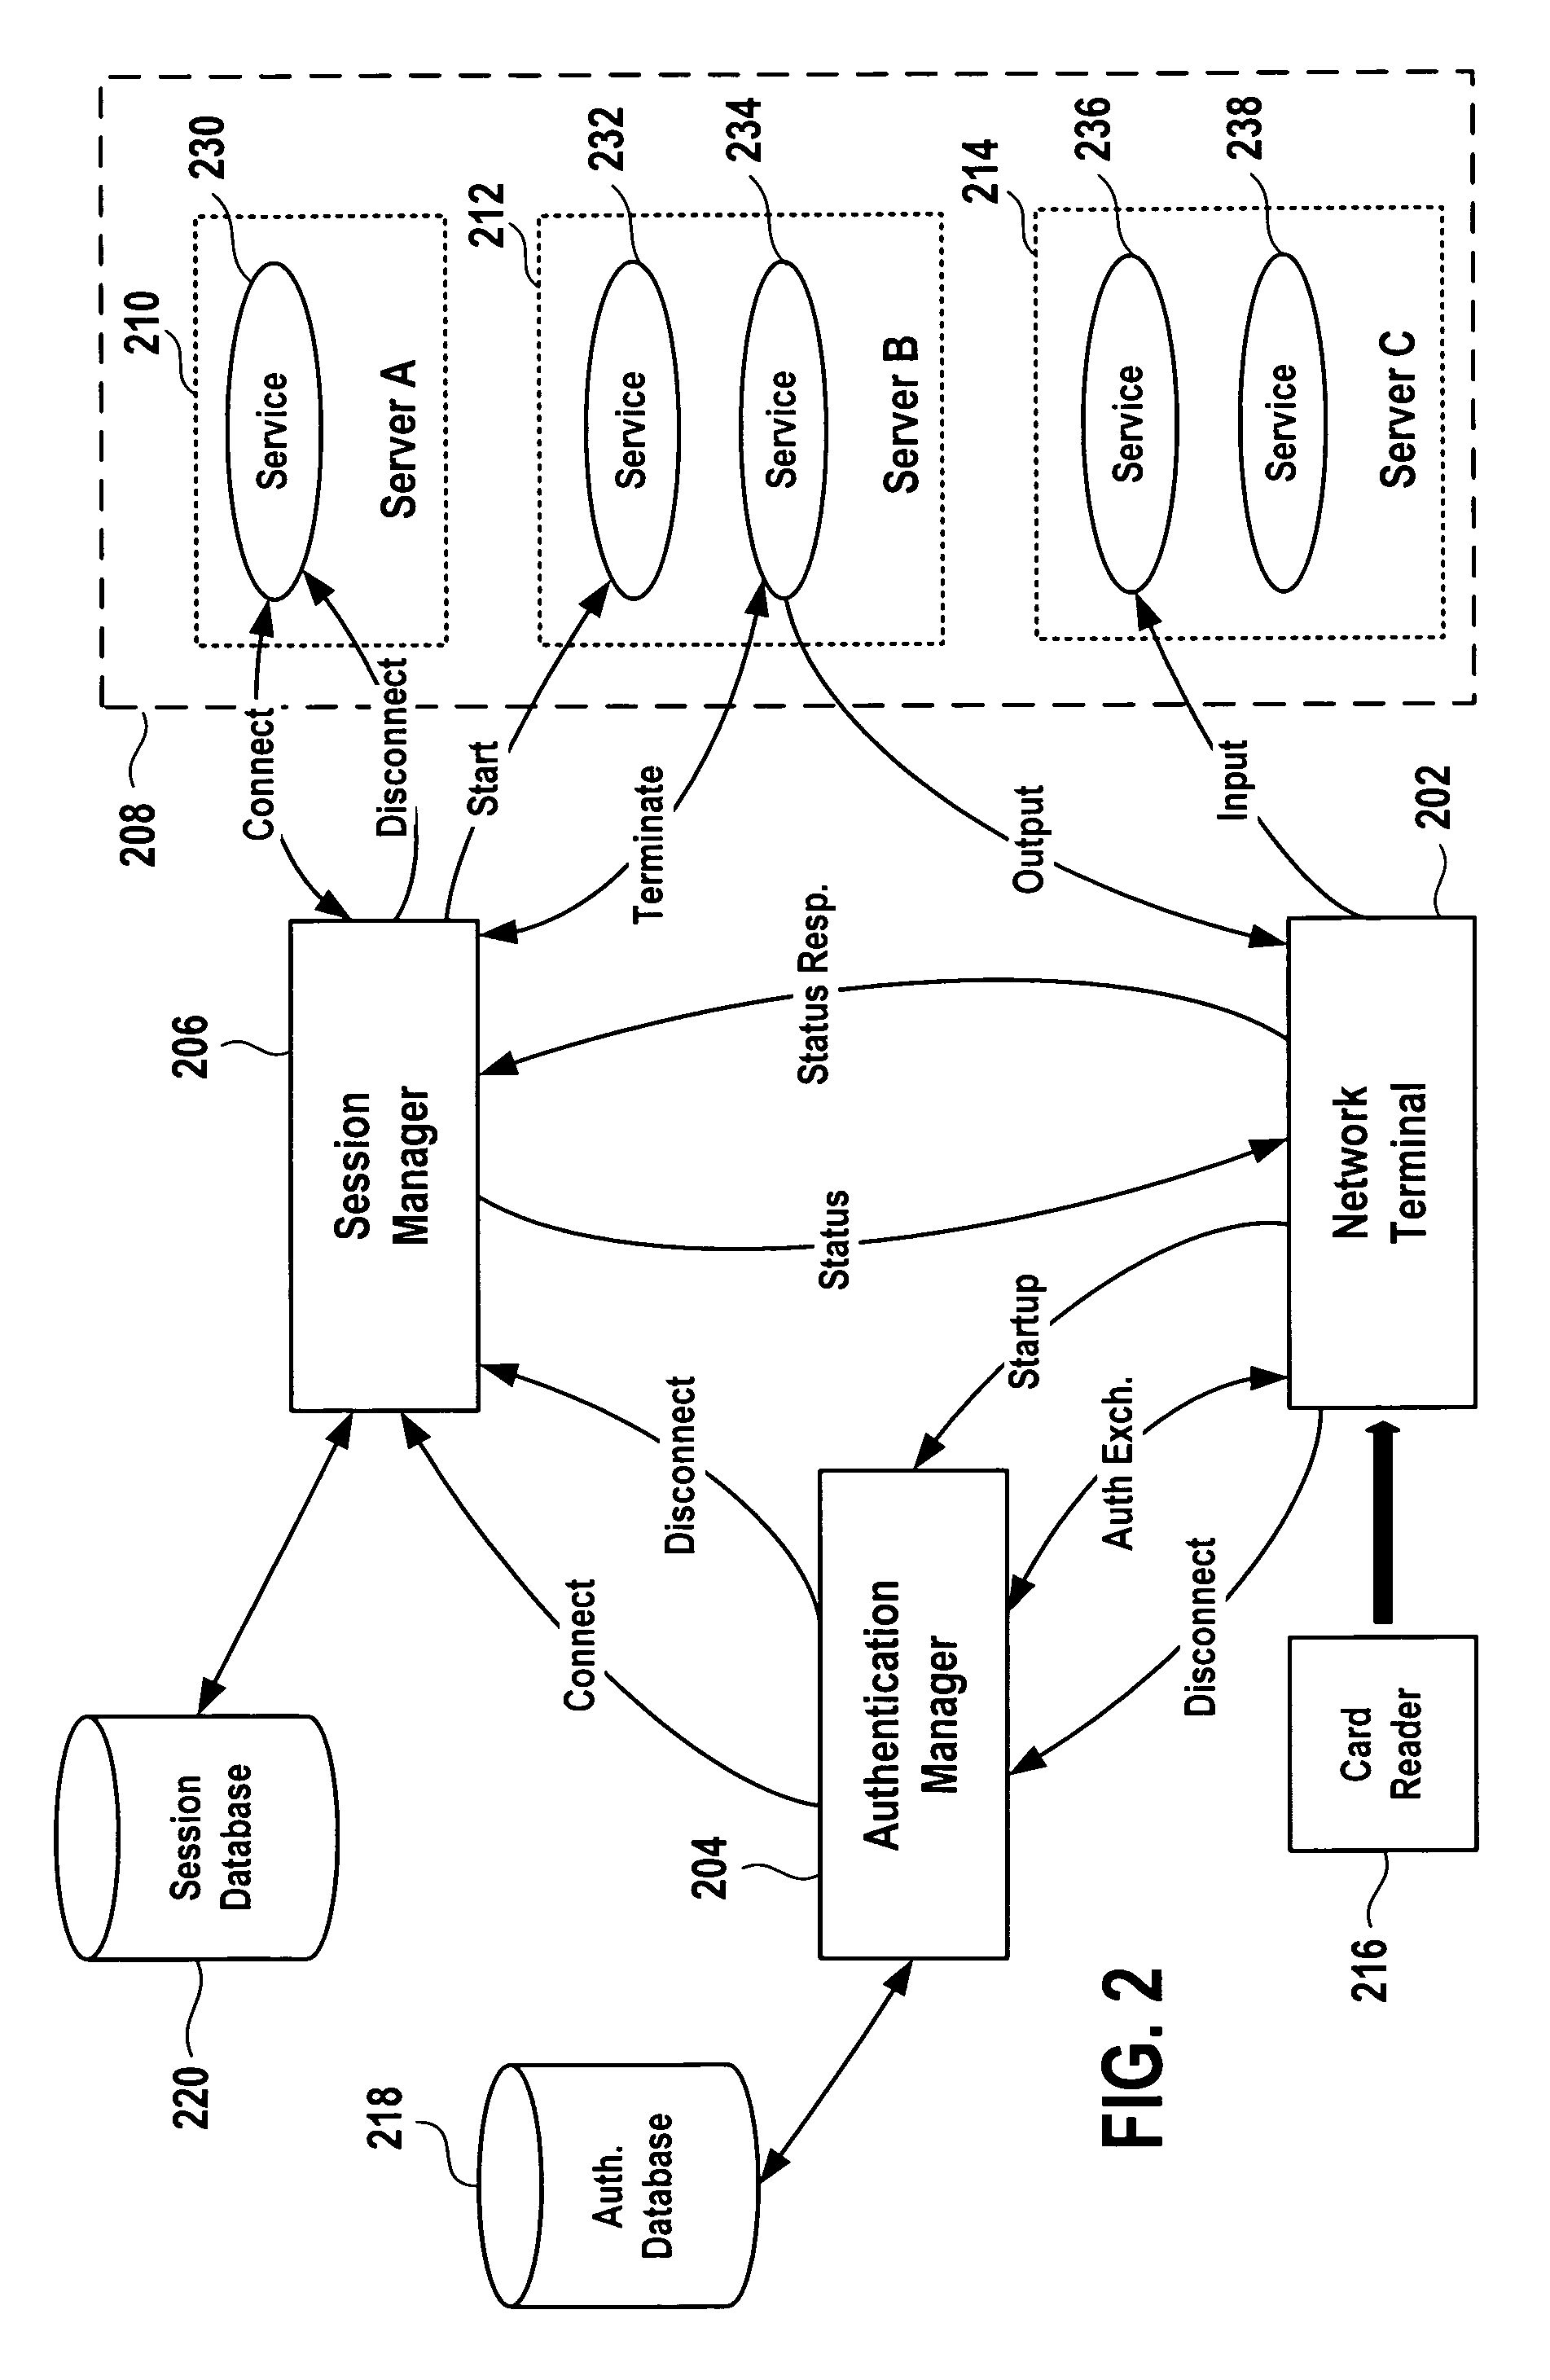 Computer architecture having a stateless human interface device and methods of use